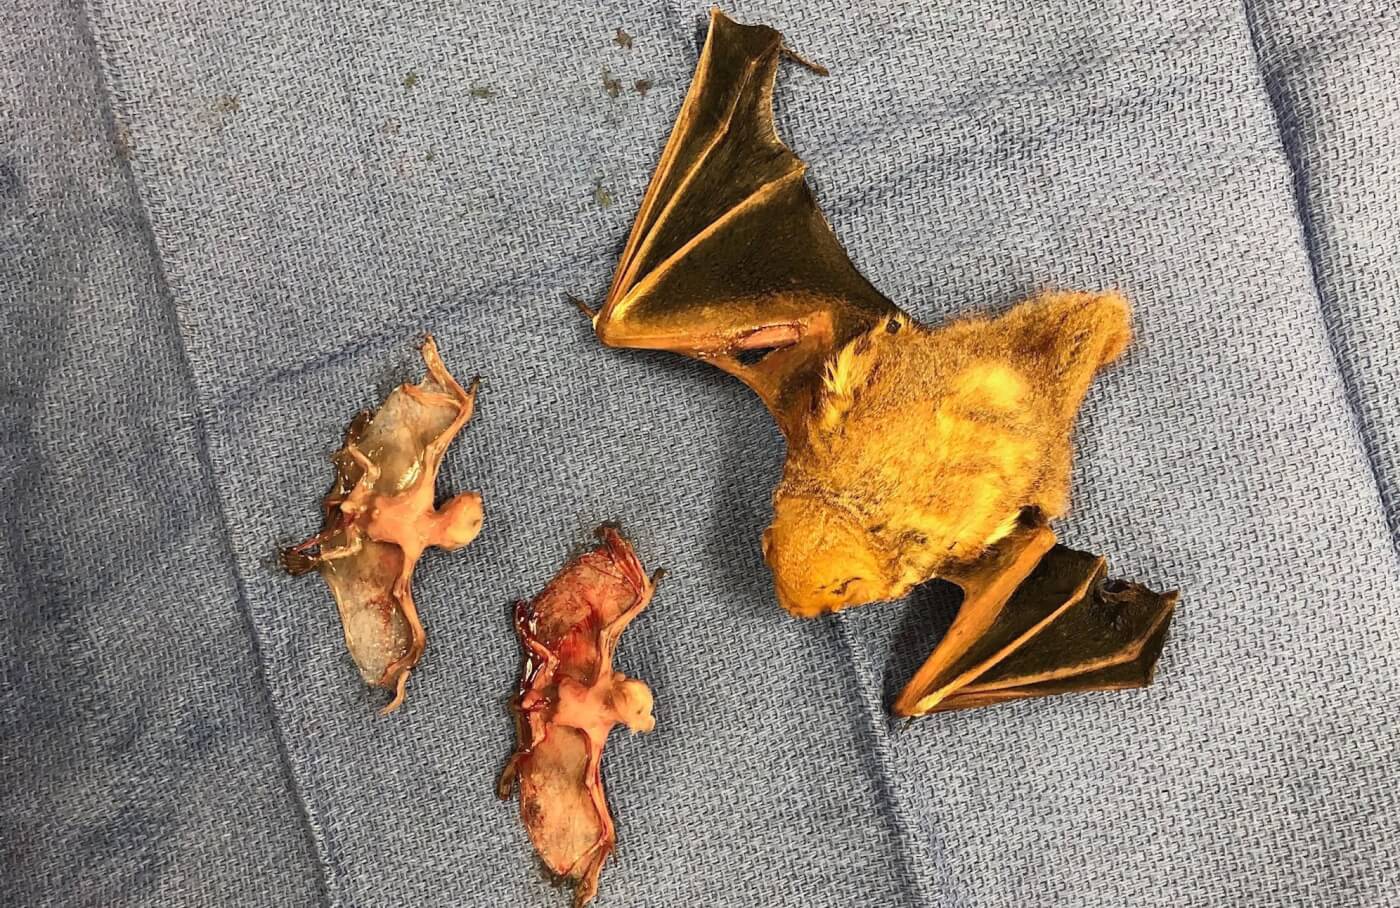 Three dead bats who were victims of outdoor cats